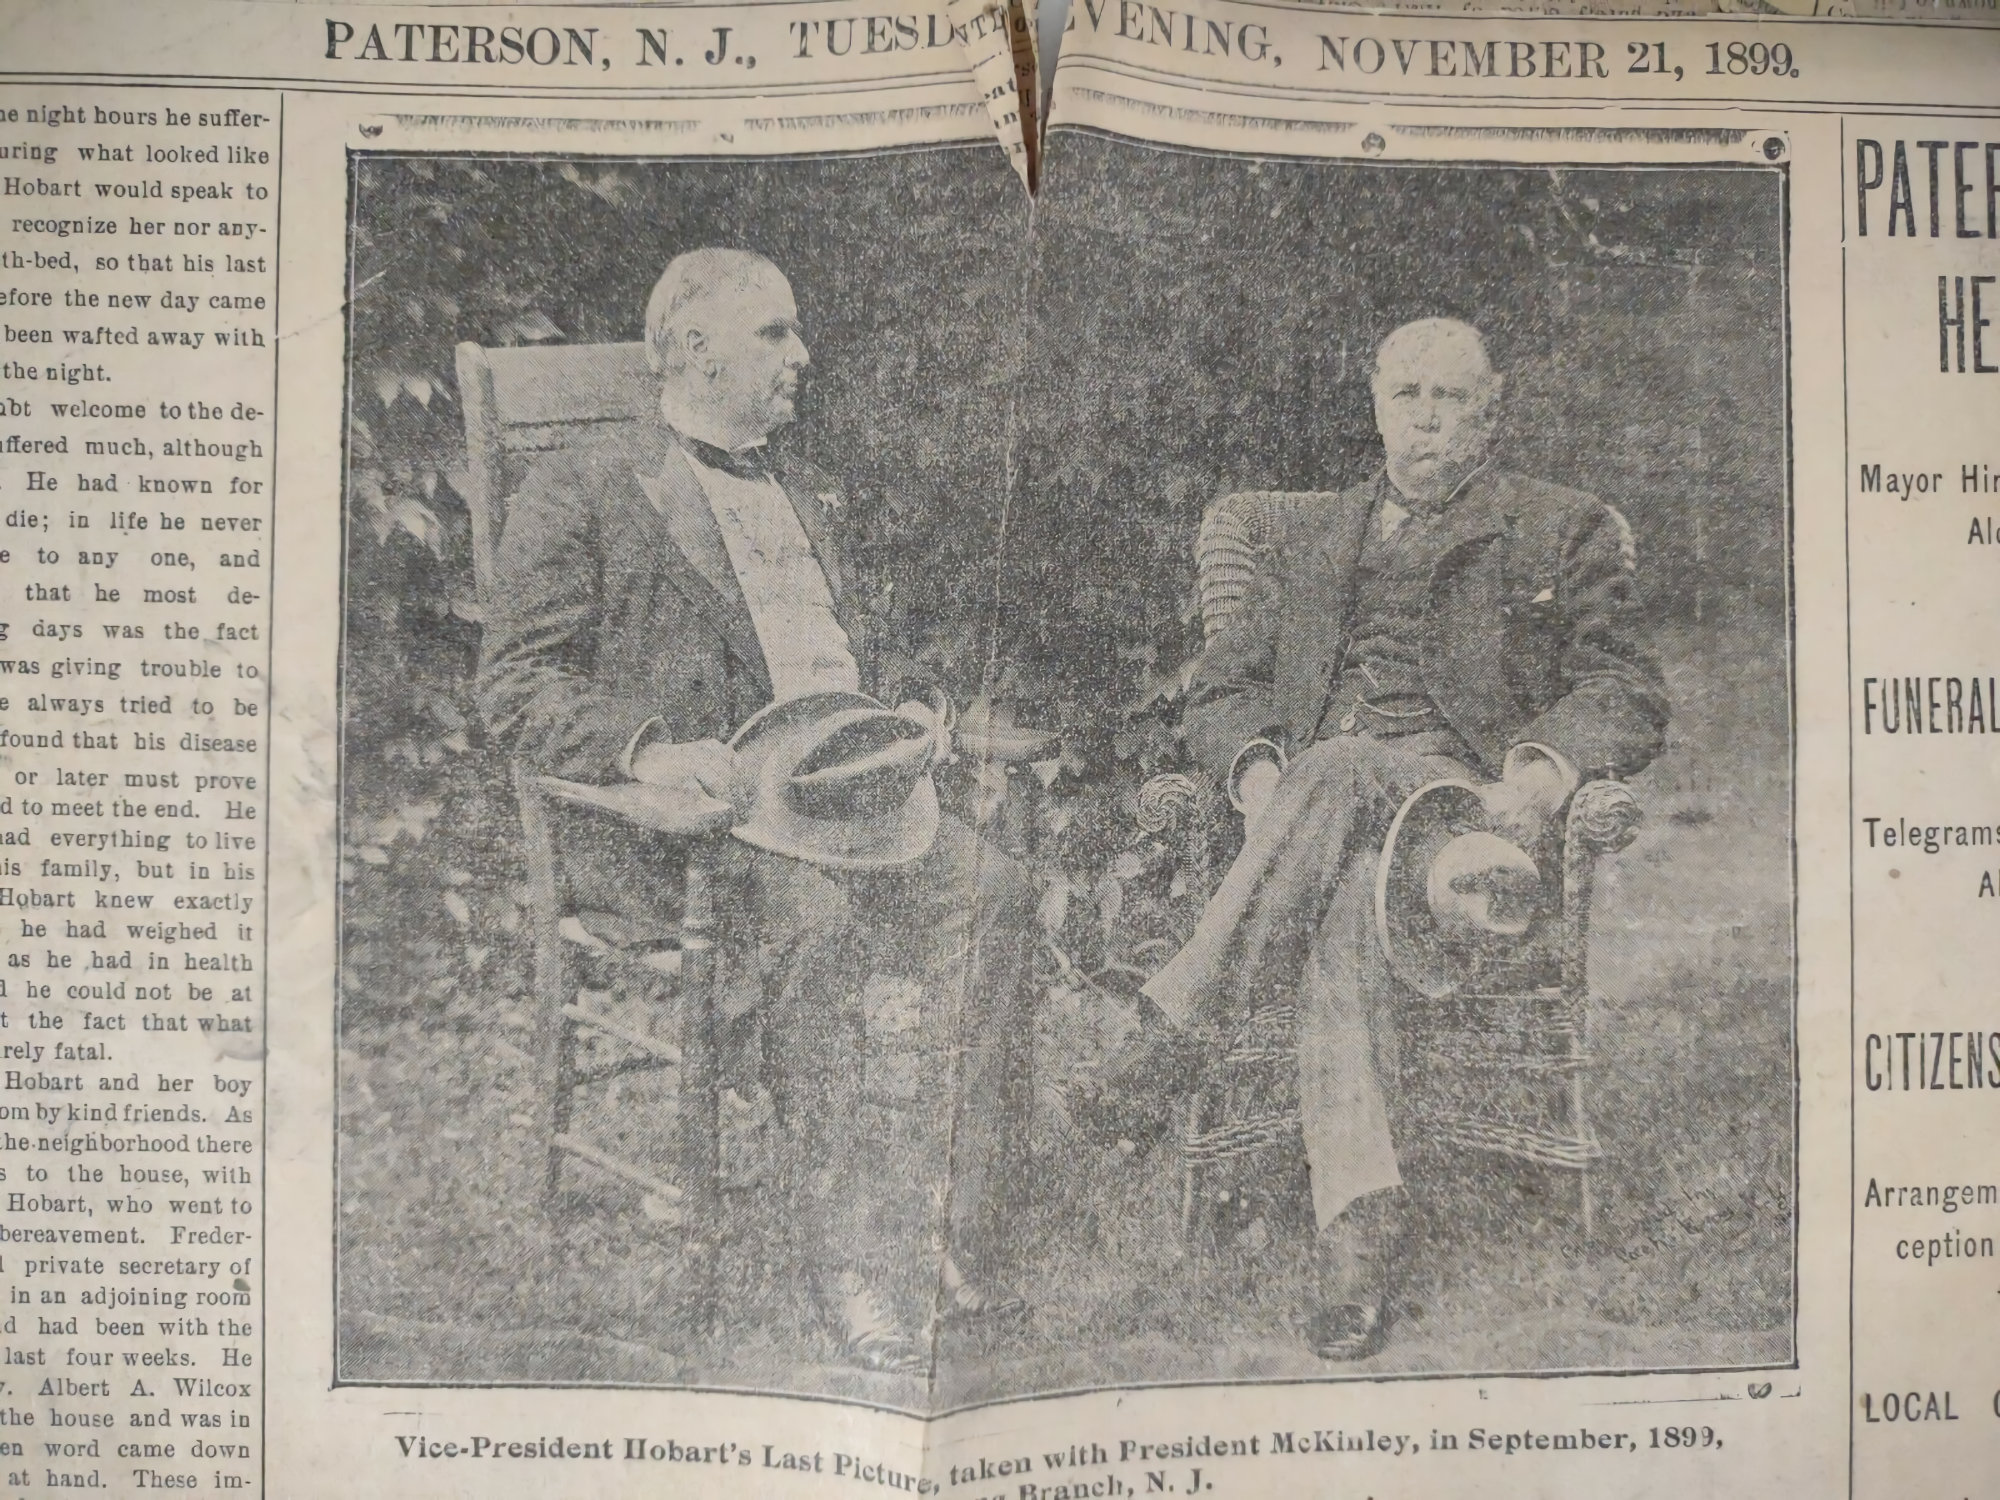 Photo of Paterson, N.J. newspaper front-page photo of President McKinley and Vice President Hobart. Image credit: History Room, Long Branch Free Public Library. Used with permission.